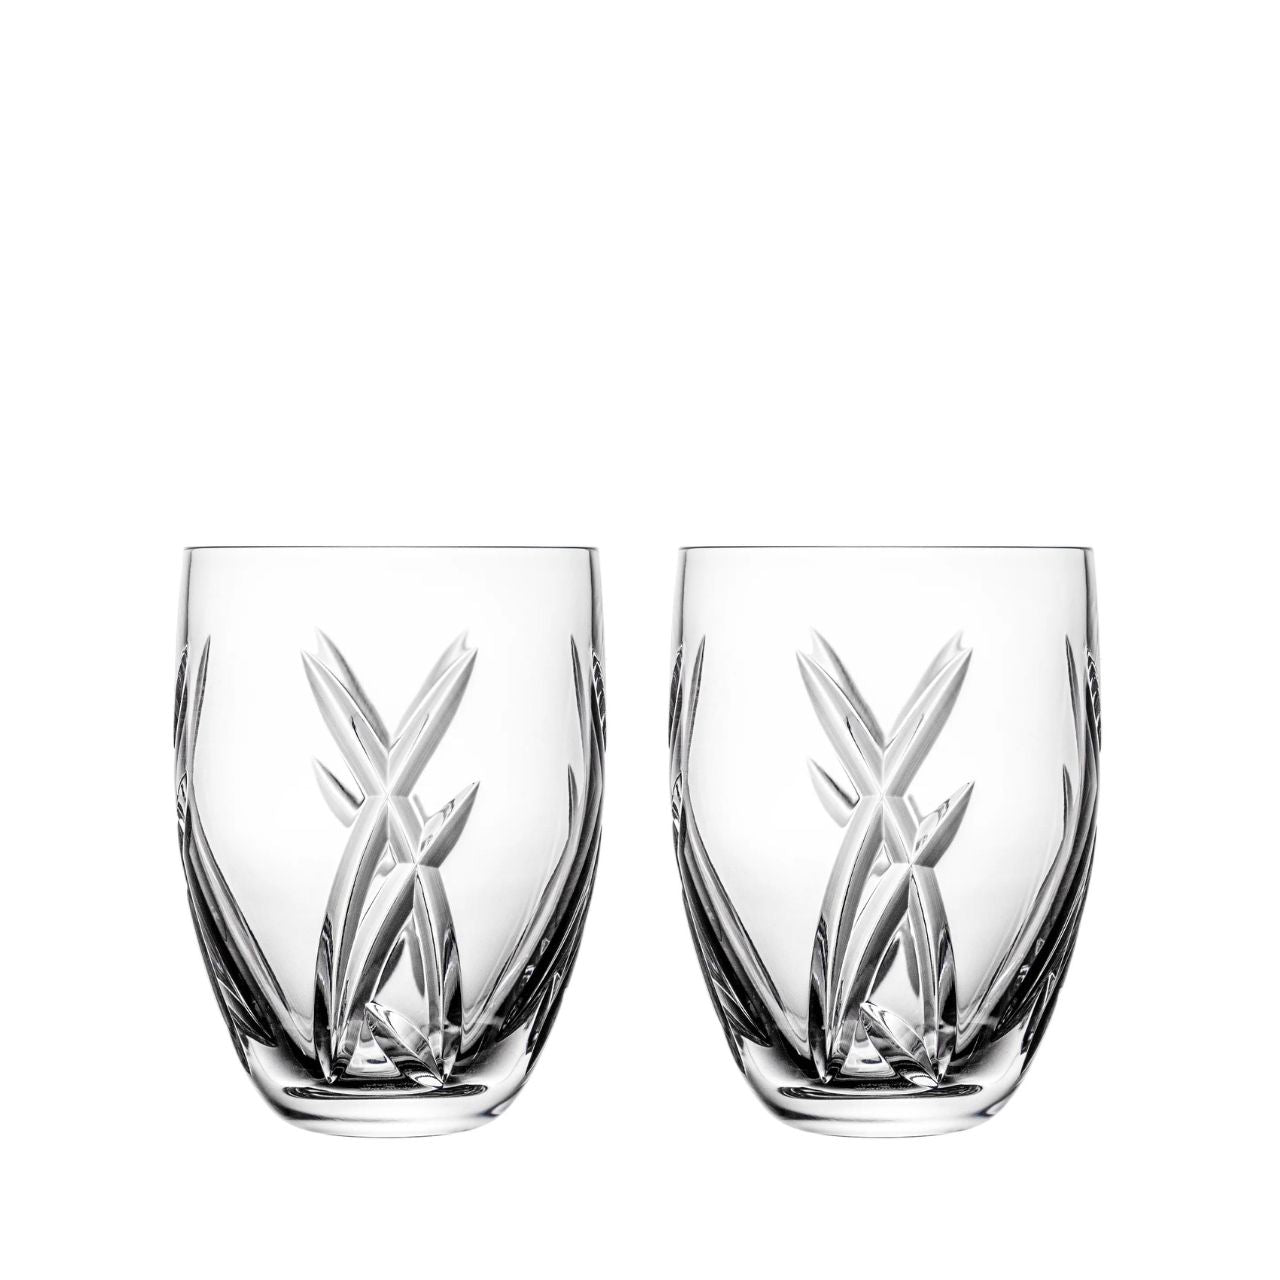 Waterford Crystal John Rocha Signature Tumbler Pair  John Rocha captures the clarity and purity of Waterford Crystal with his contemporary collection of stemware. Elegantly serve Scotch, whiskey or mixed drinks in these dramatic and stylish John Rocha Signature Tumblers, which make a stunning statement on your dining table or bar.